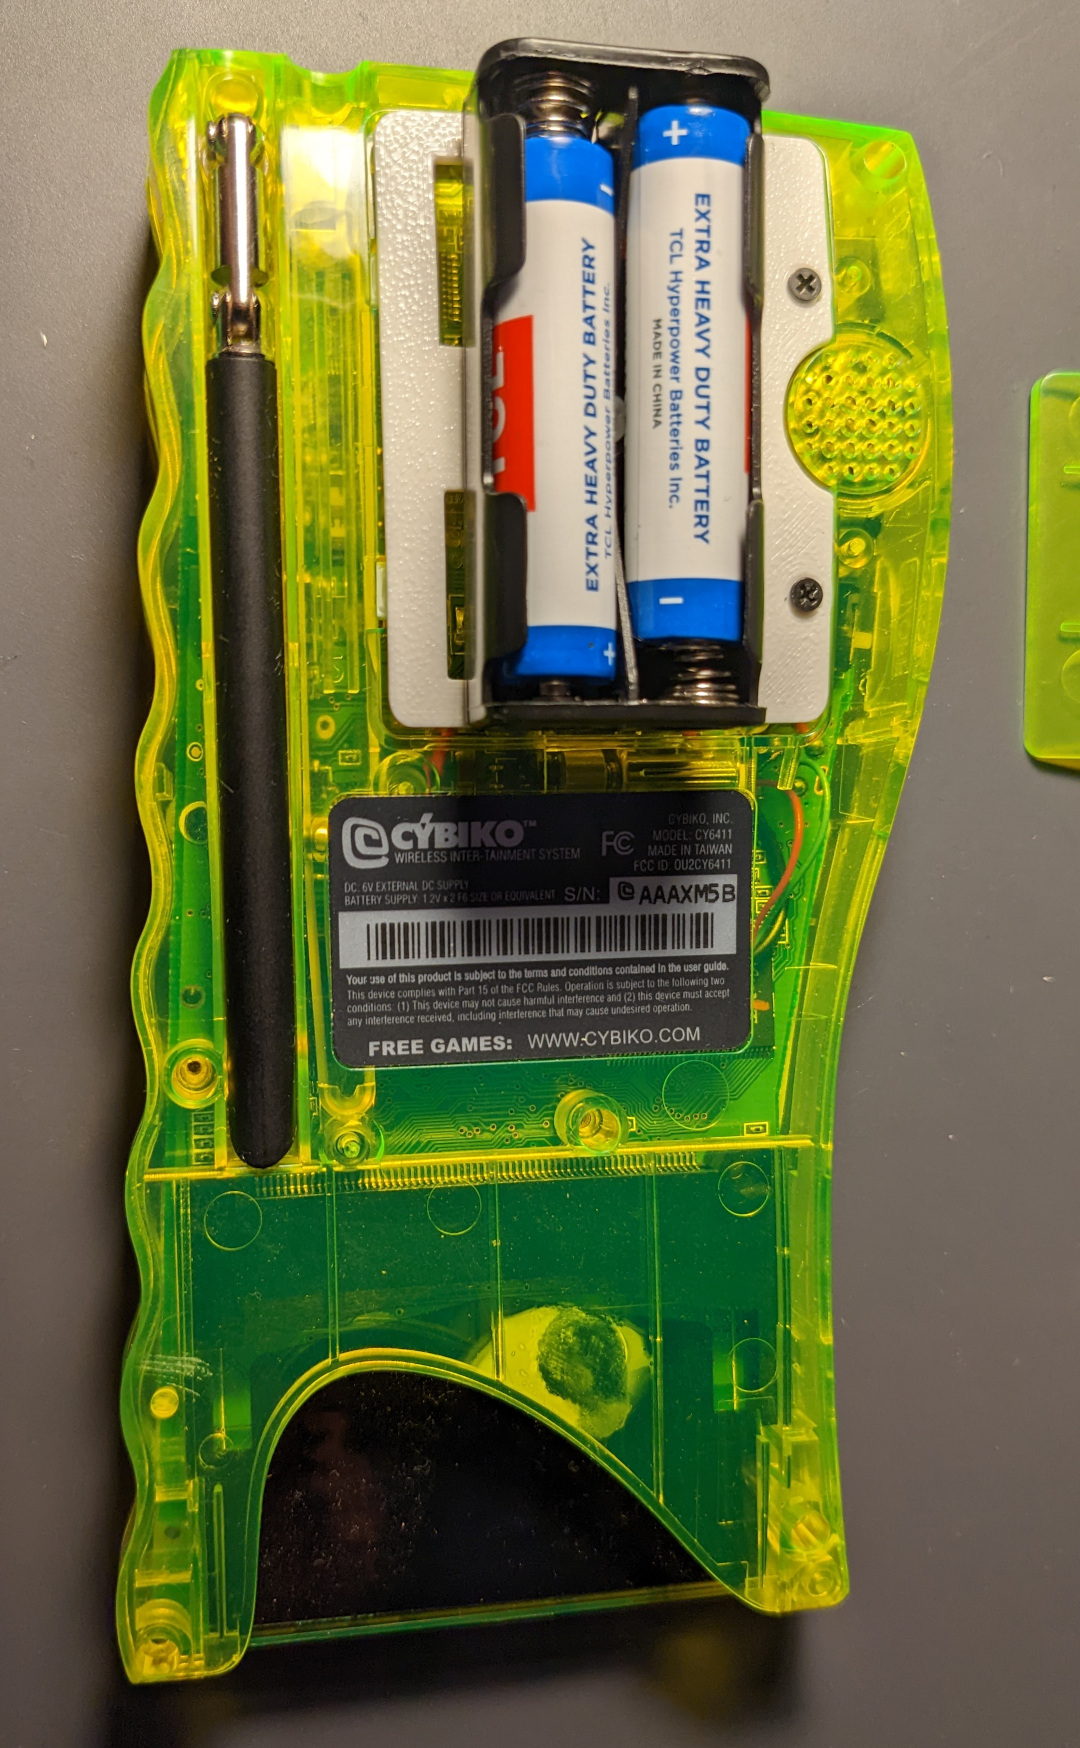 Cybiko assembled with replacement battery compartment door and external battery compartment